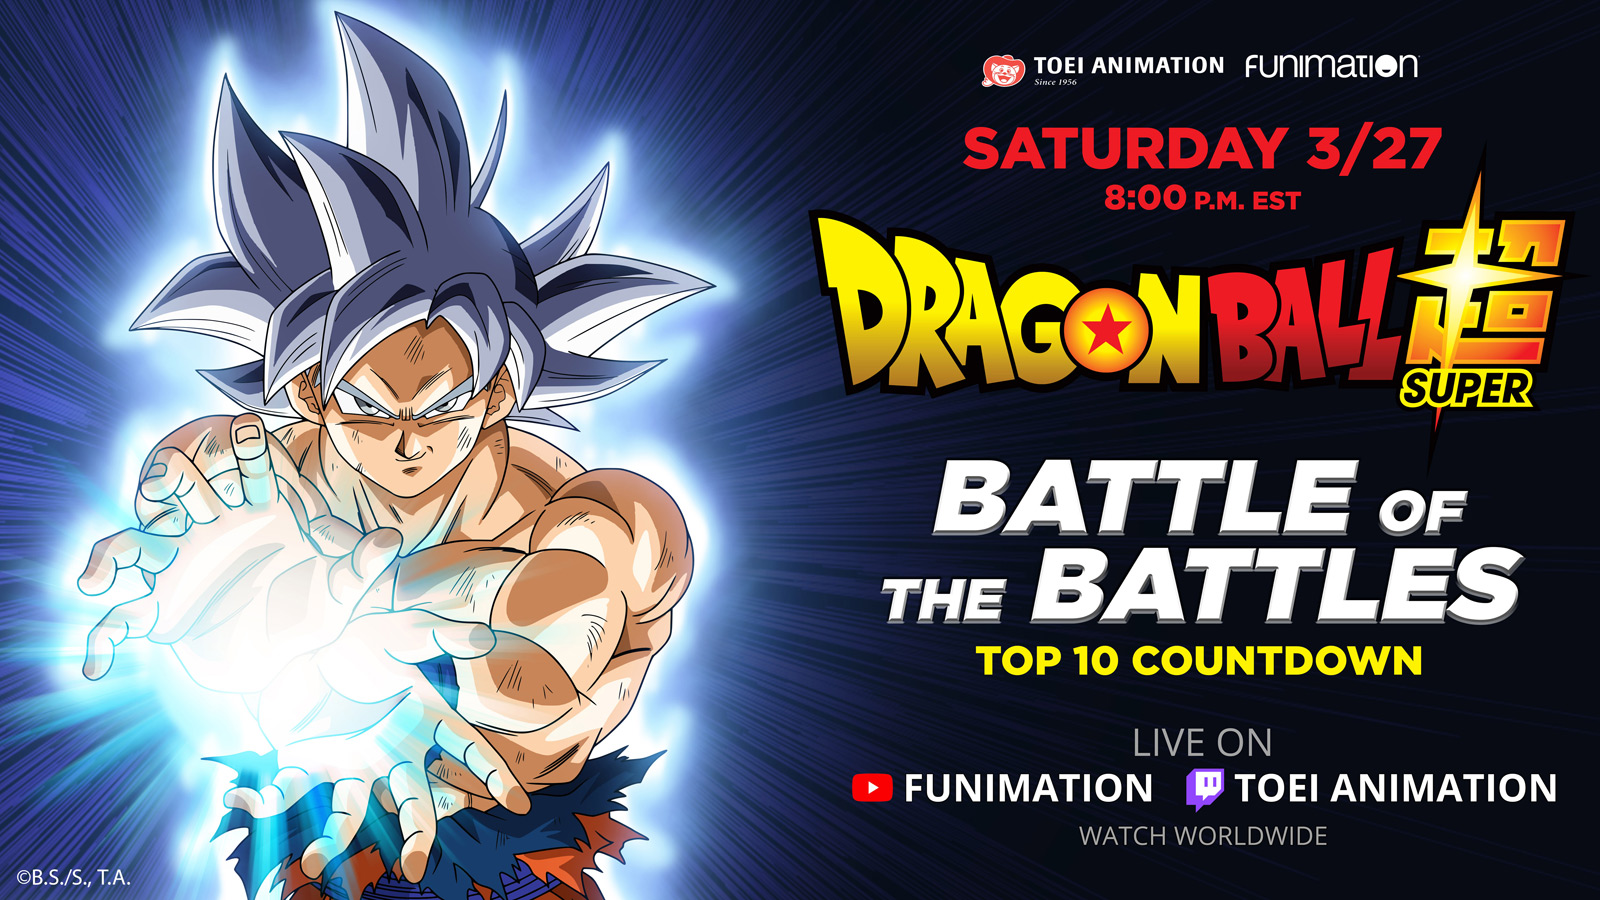 TOEI ANIMATION AND FUNIMATION ANNOUNCE “DRAGON BALL SUPER: BATTLE OF THE BATTLES” WORLDWIDE VIRTUAL FAN EVENT COMING MARCH 27, 2021!